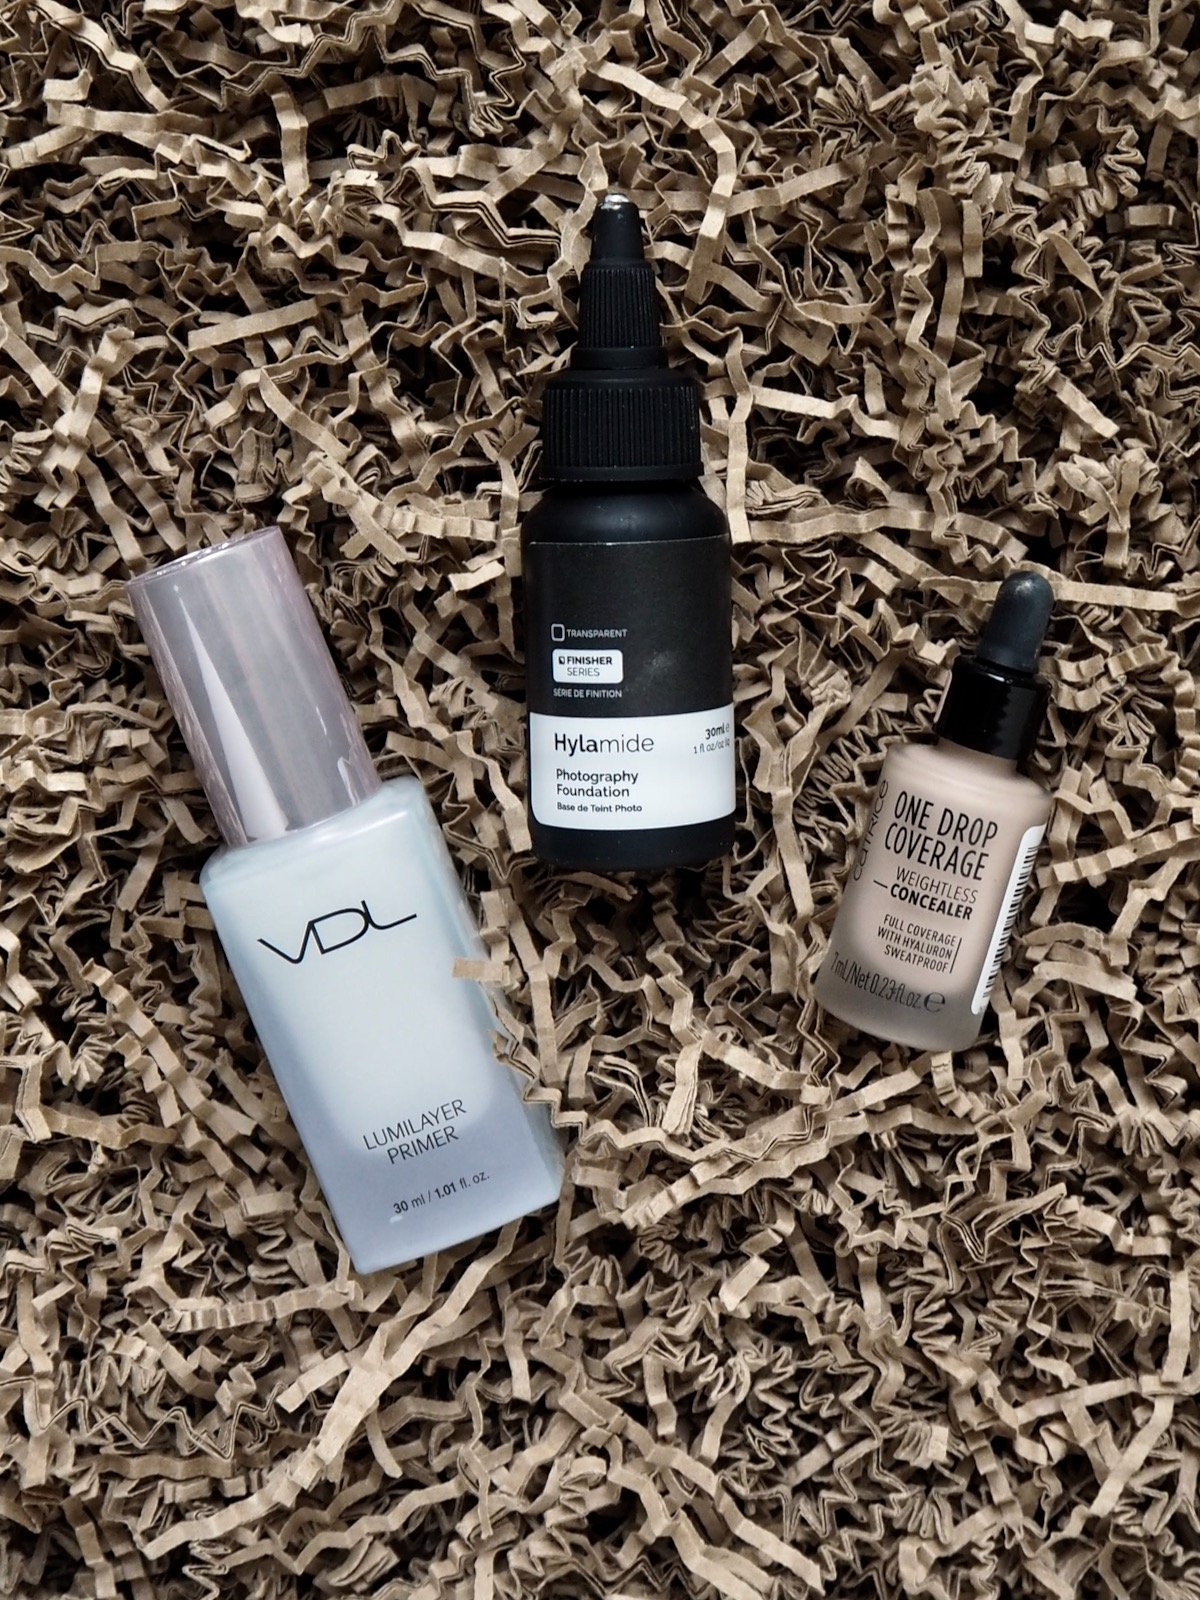 VDL Lumilayer Primer Hyalamide Photography Foundation Catrice One Drop Coverage